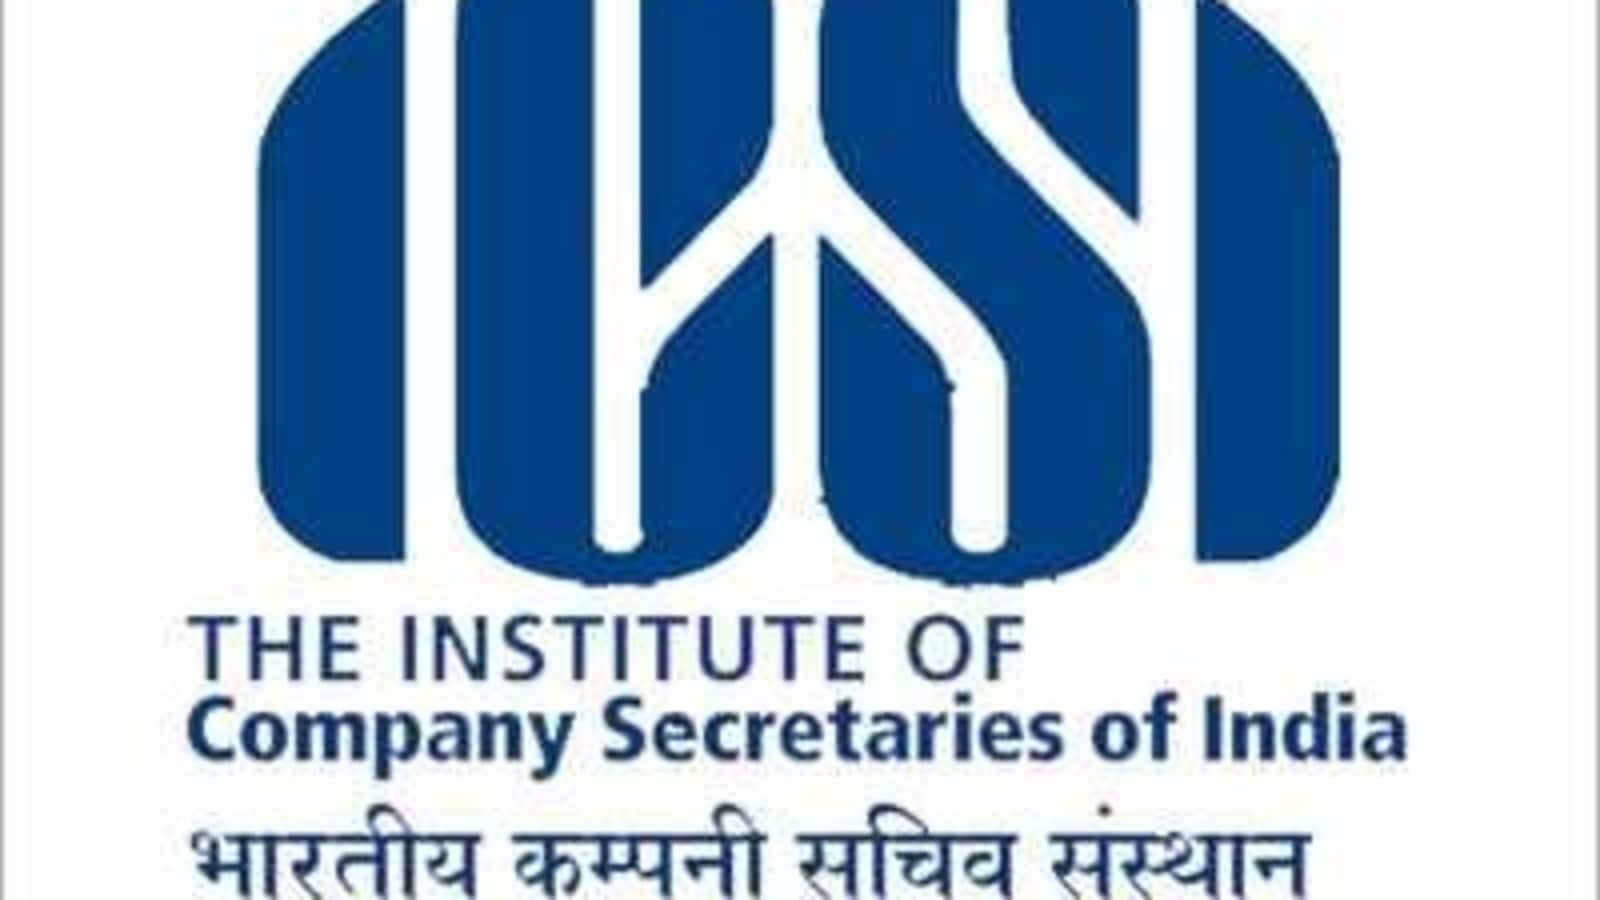 ICSI CSEET January 2022: Mock test to be conducted today, exam on Jan 8